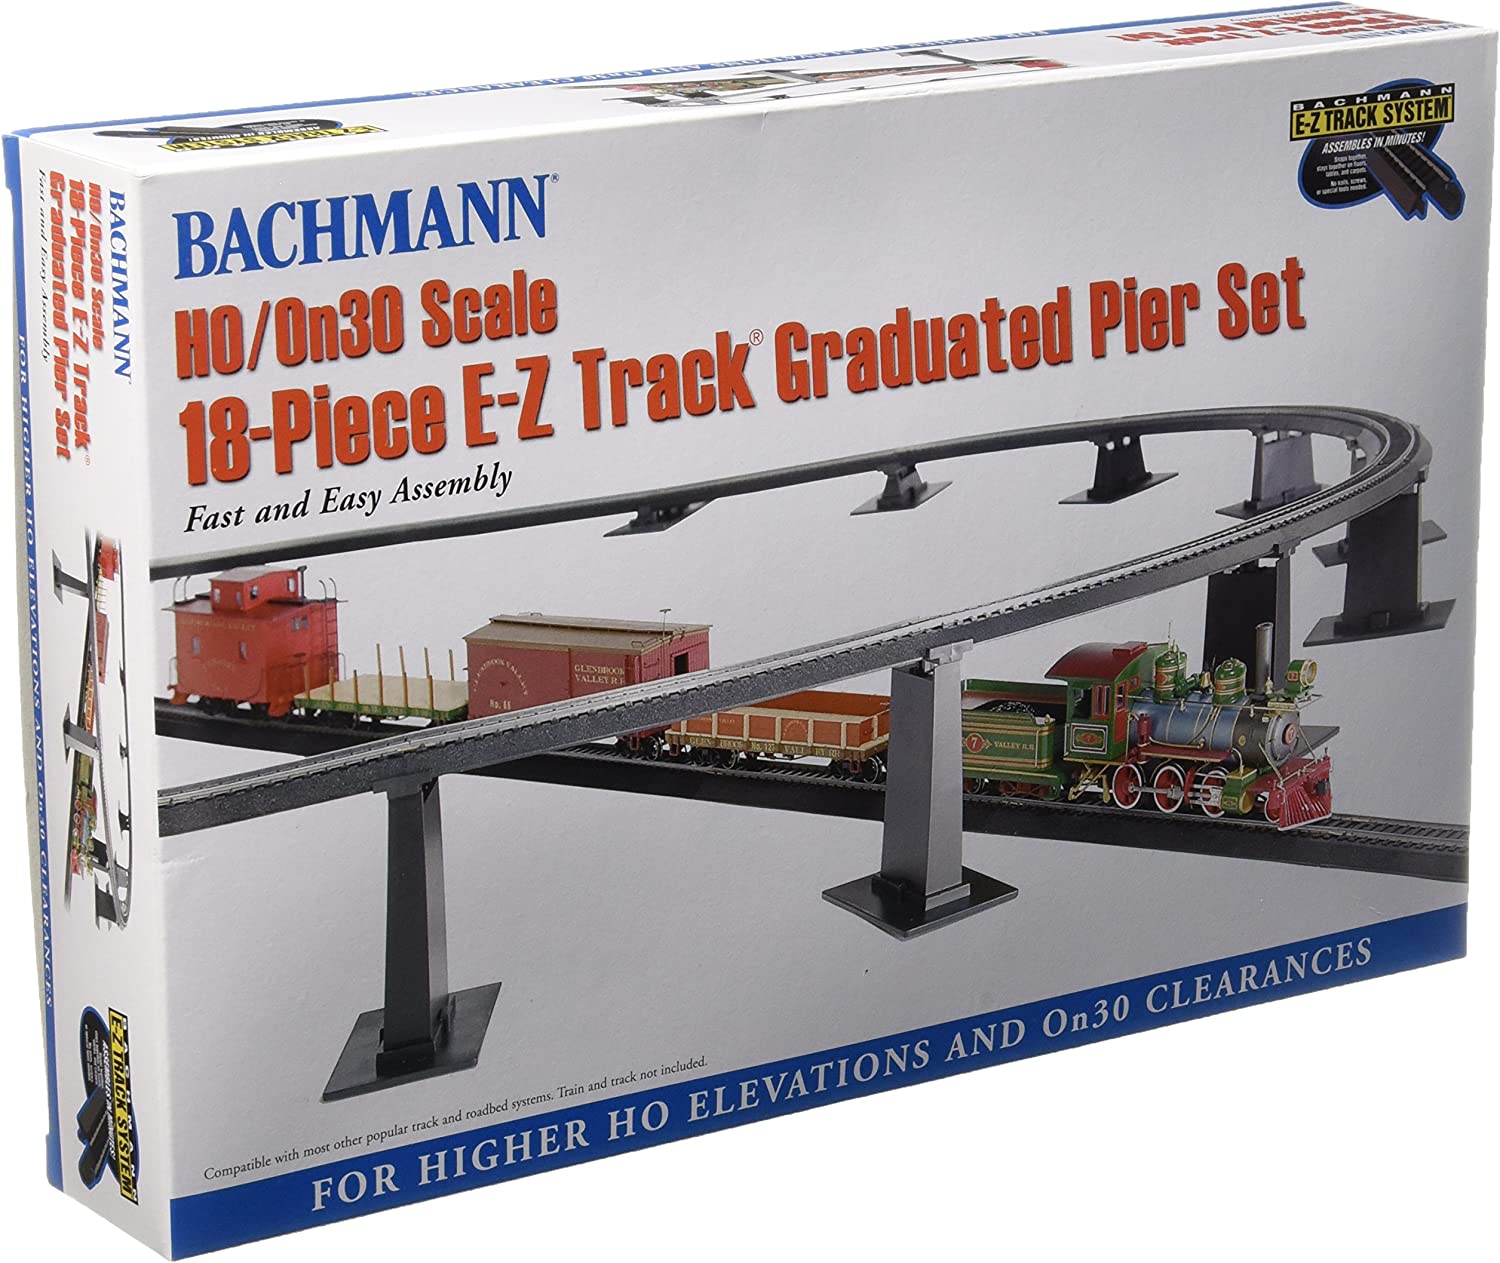 Bachmann 44595 HO Scale E-Z TRACK 18 PC Graduated Pier Set (compatible with On30) - image 1 of 2